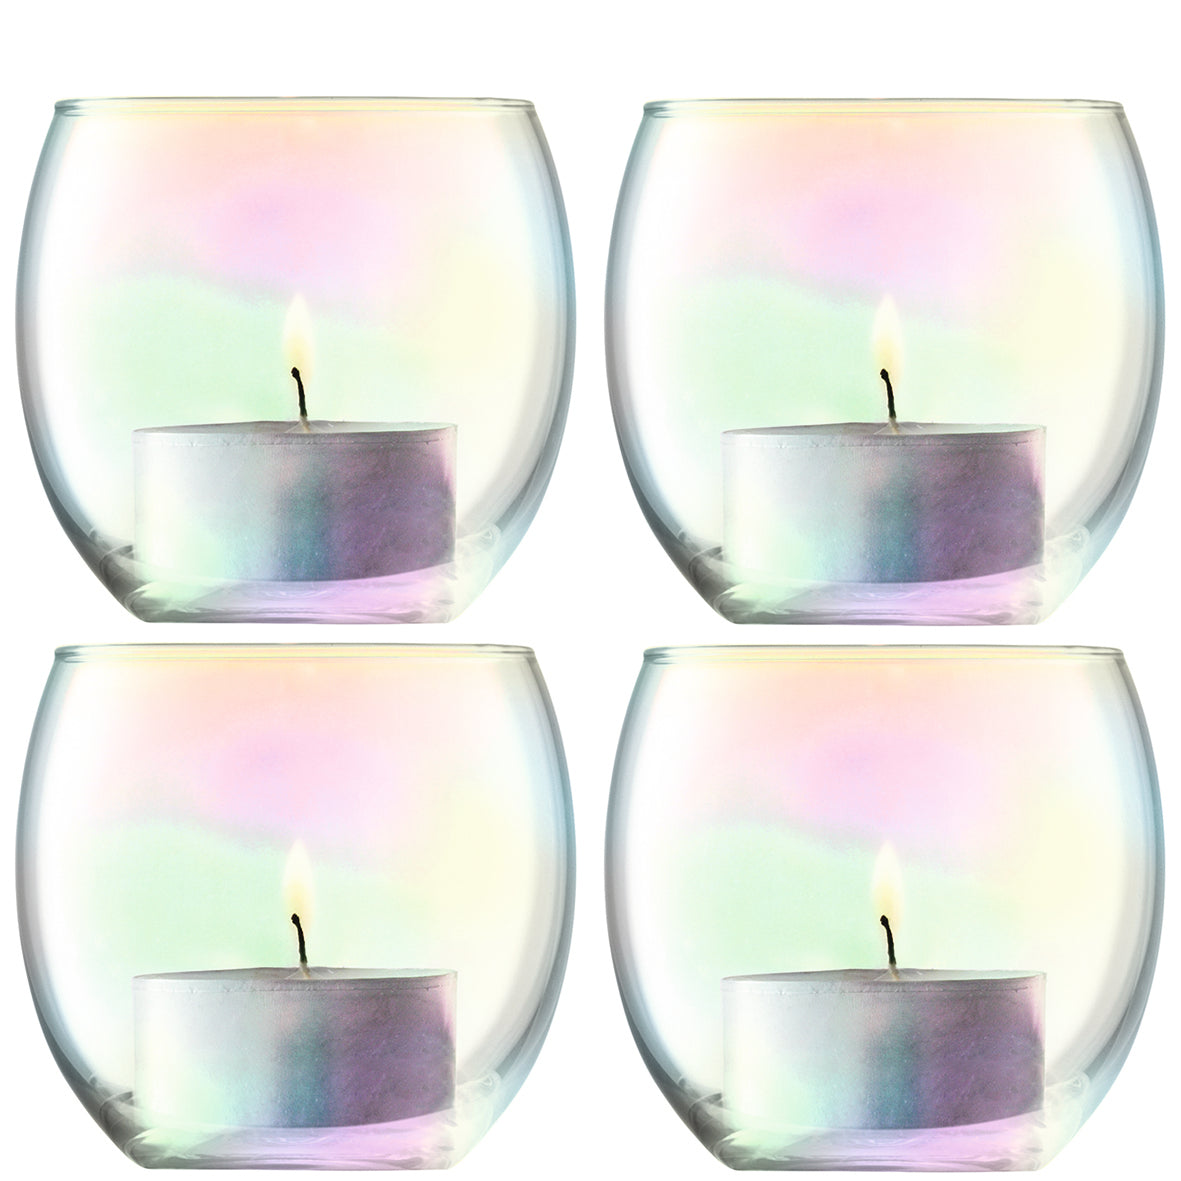 cadeauxwells - Set of four Mother of Pearl Tealight Holders - LSA - Glassware